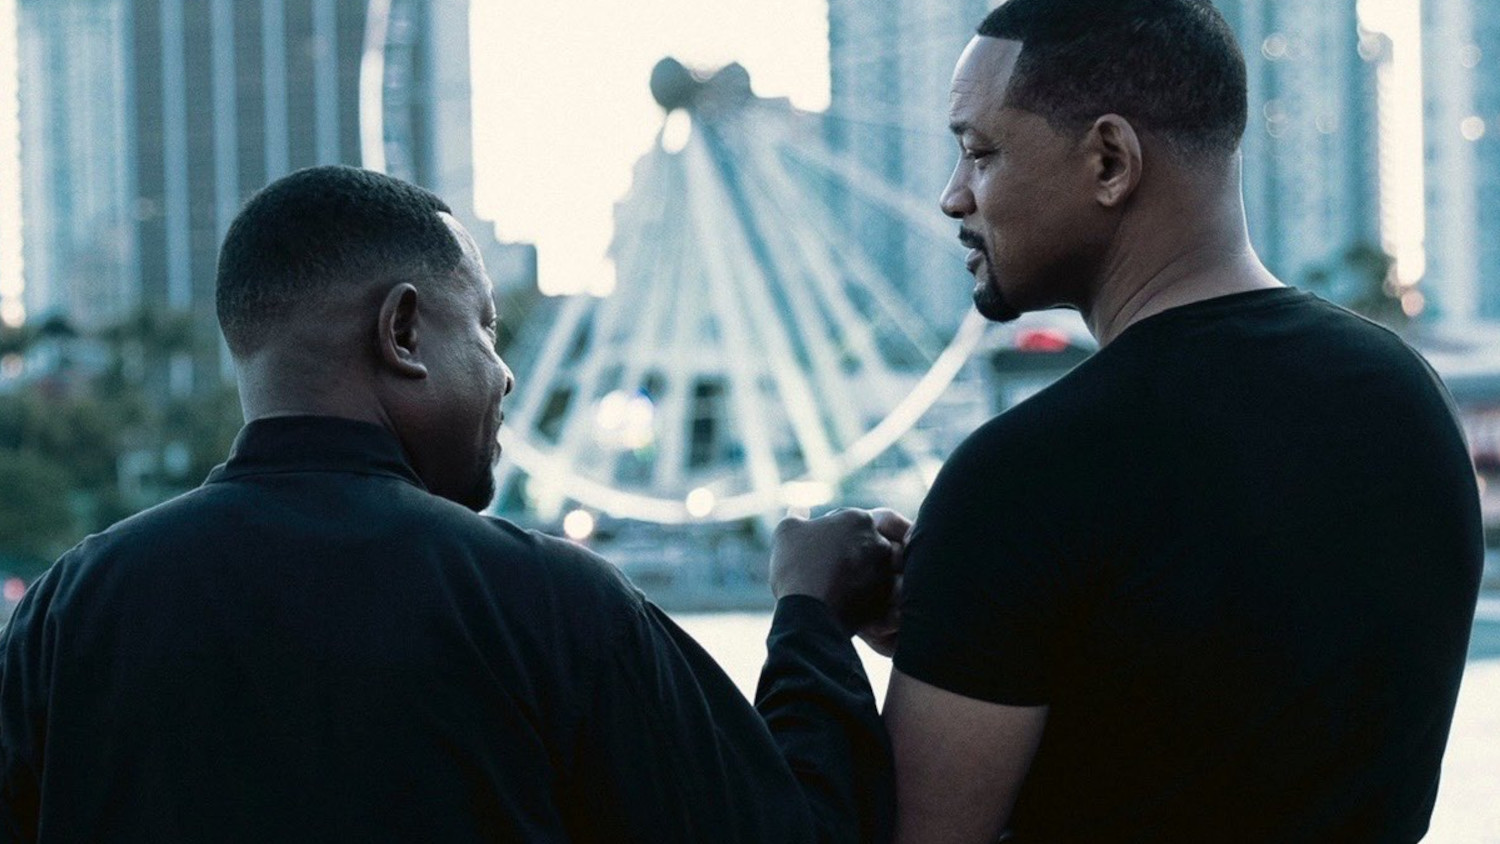 Bad Boys: Ride Or Die Trailer Brings Back Will Smith and Martin Lawrence